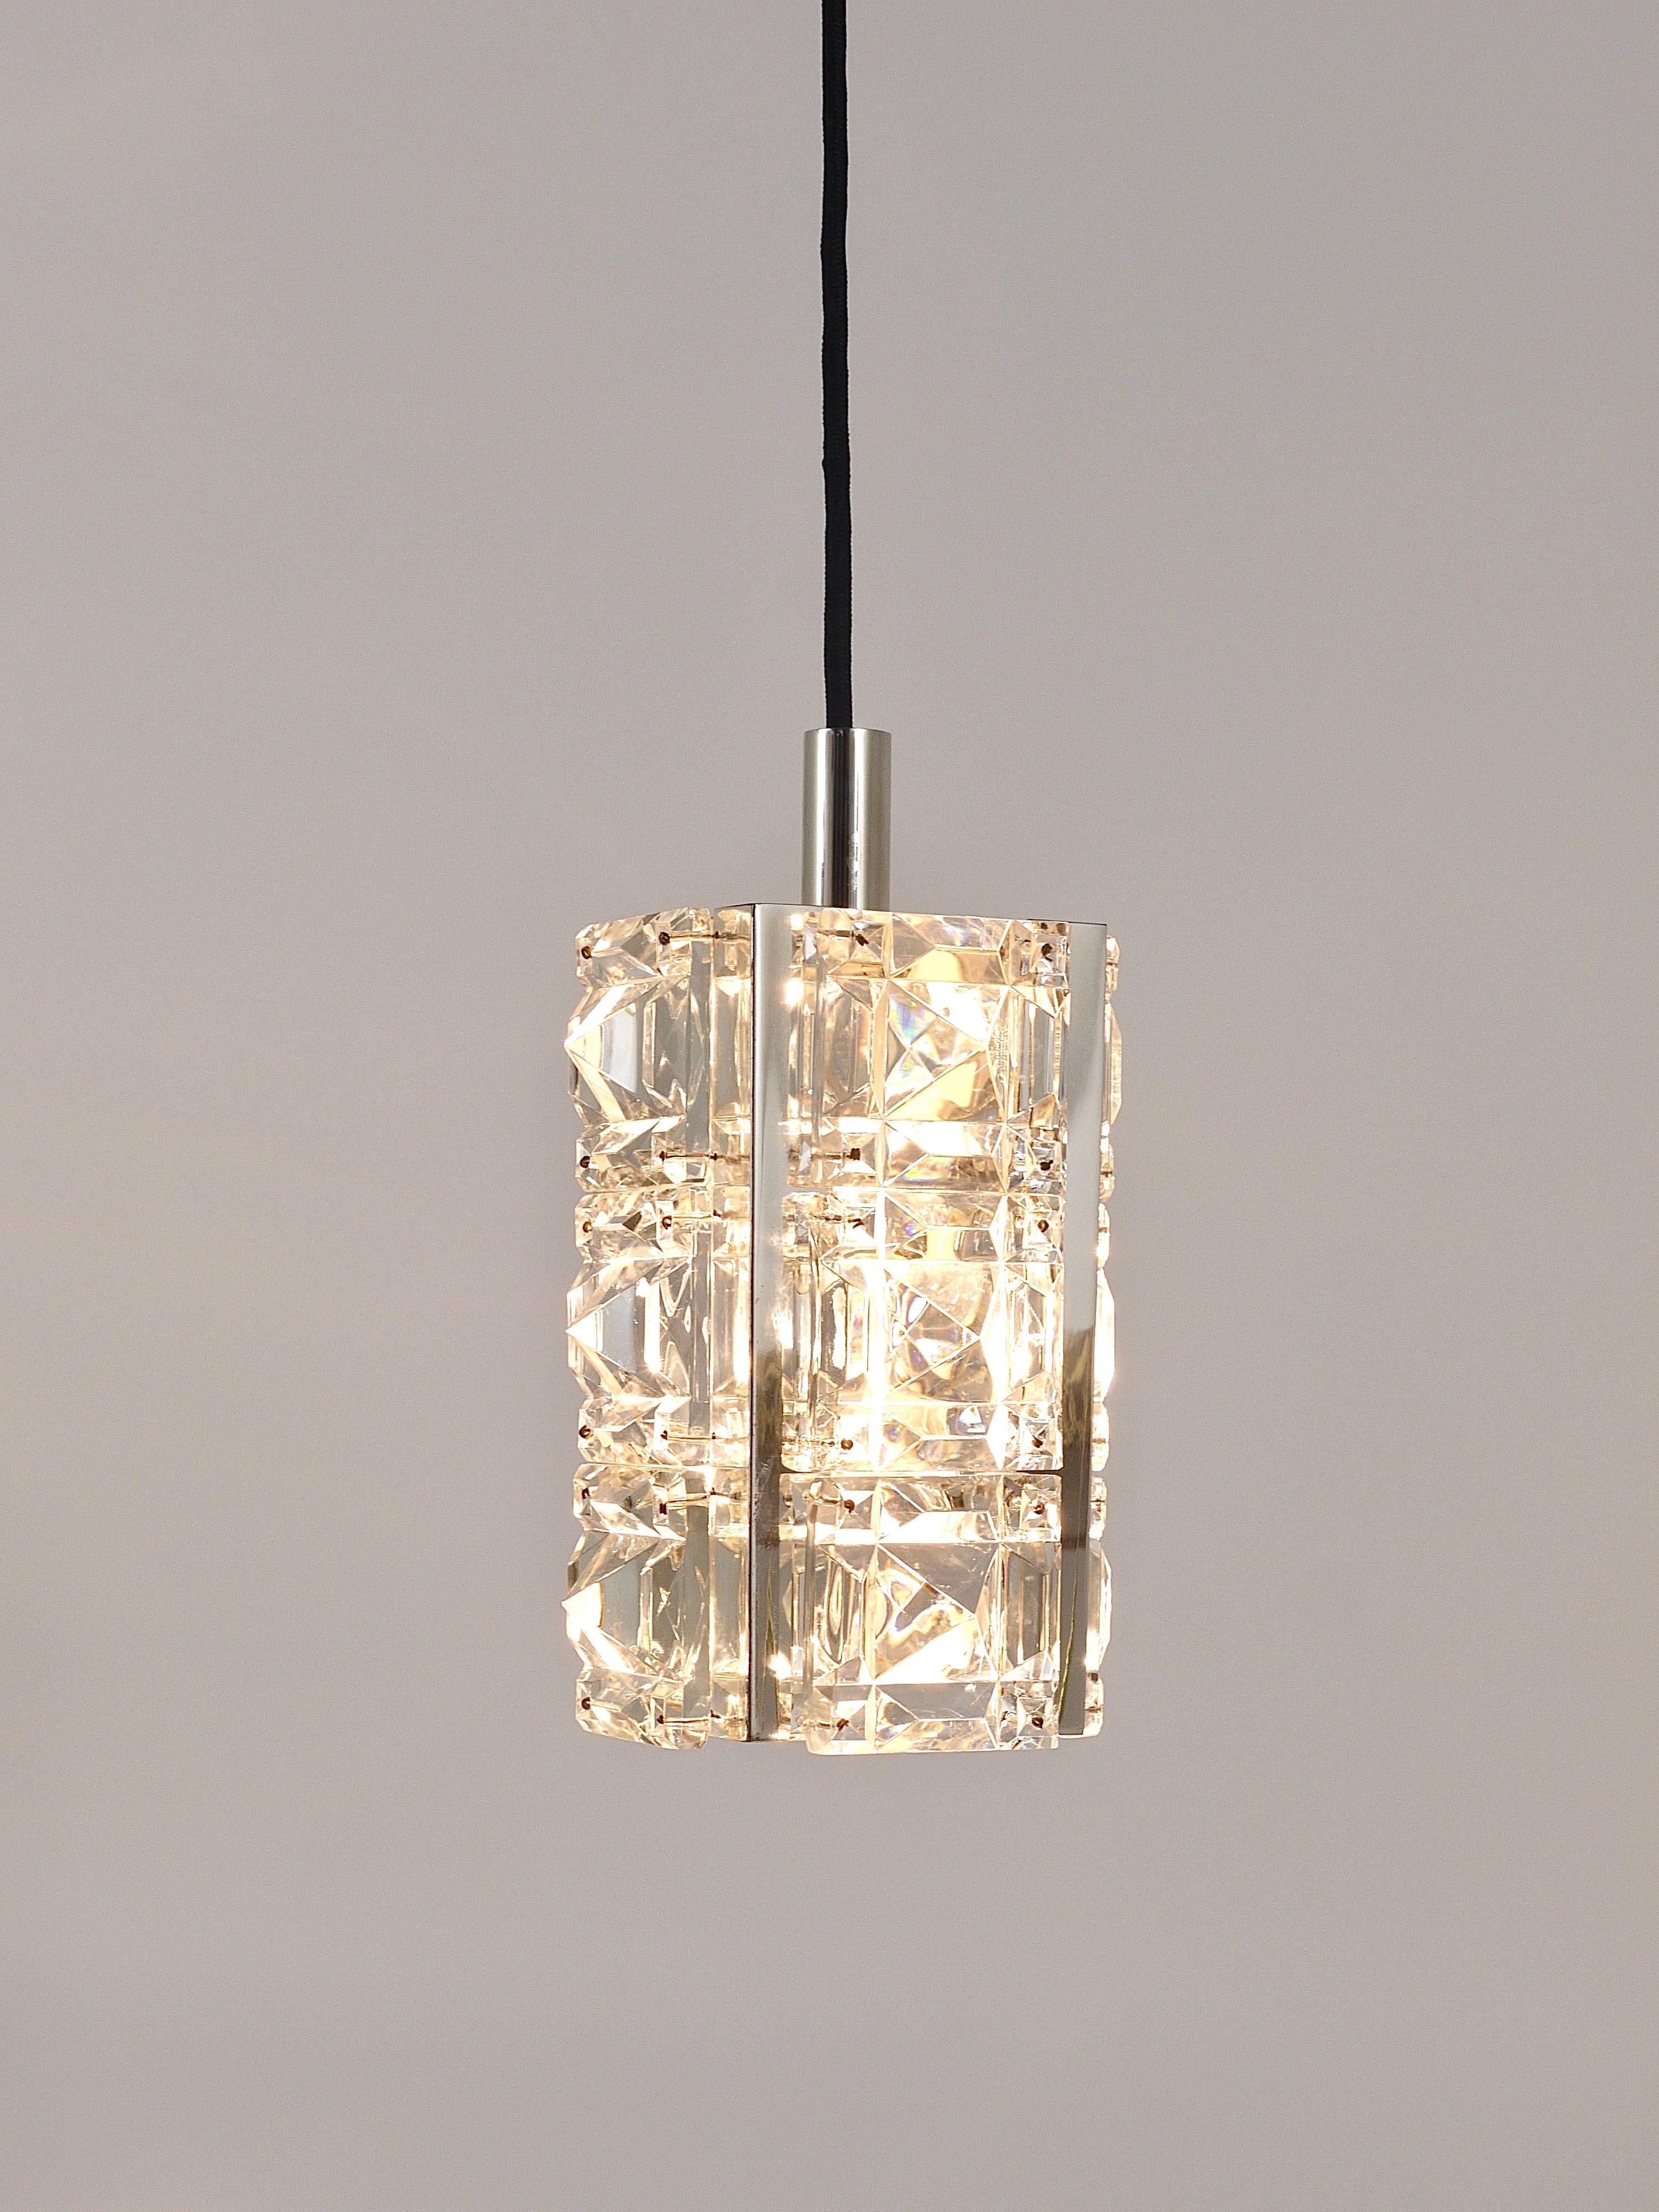 Up to Three Identical Bakalowits Faceted Crystal Pendant Lamps, Austria, 1960s For Sale 2